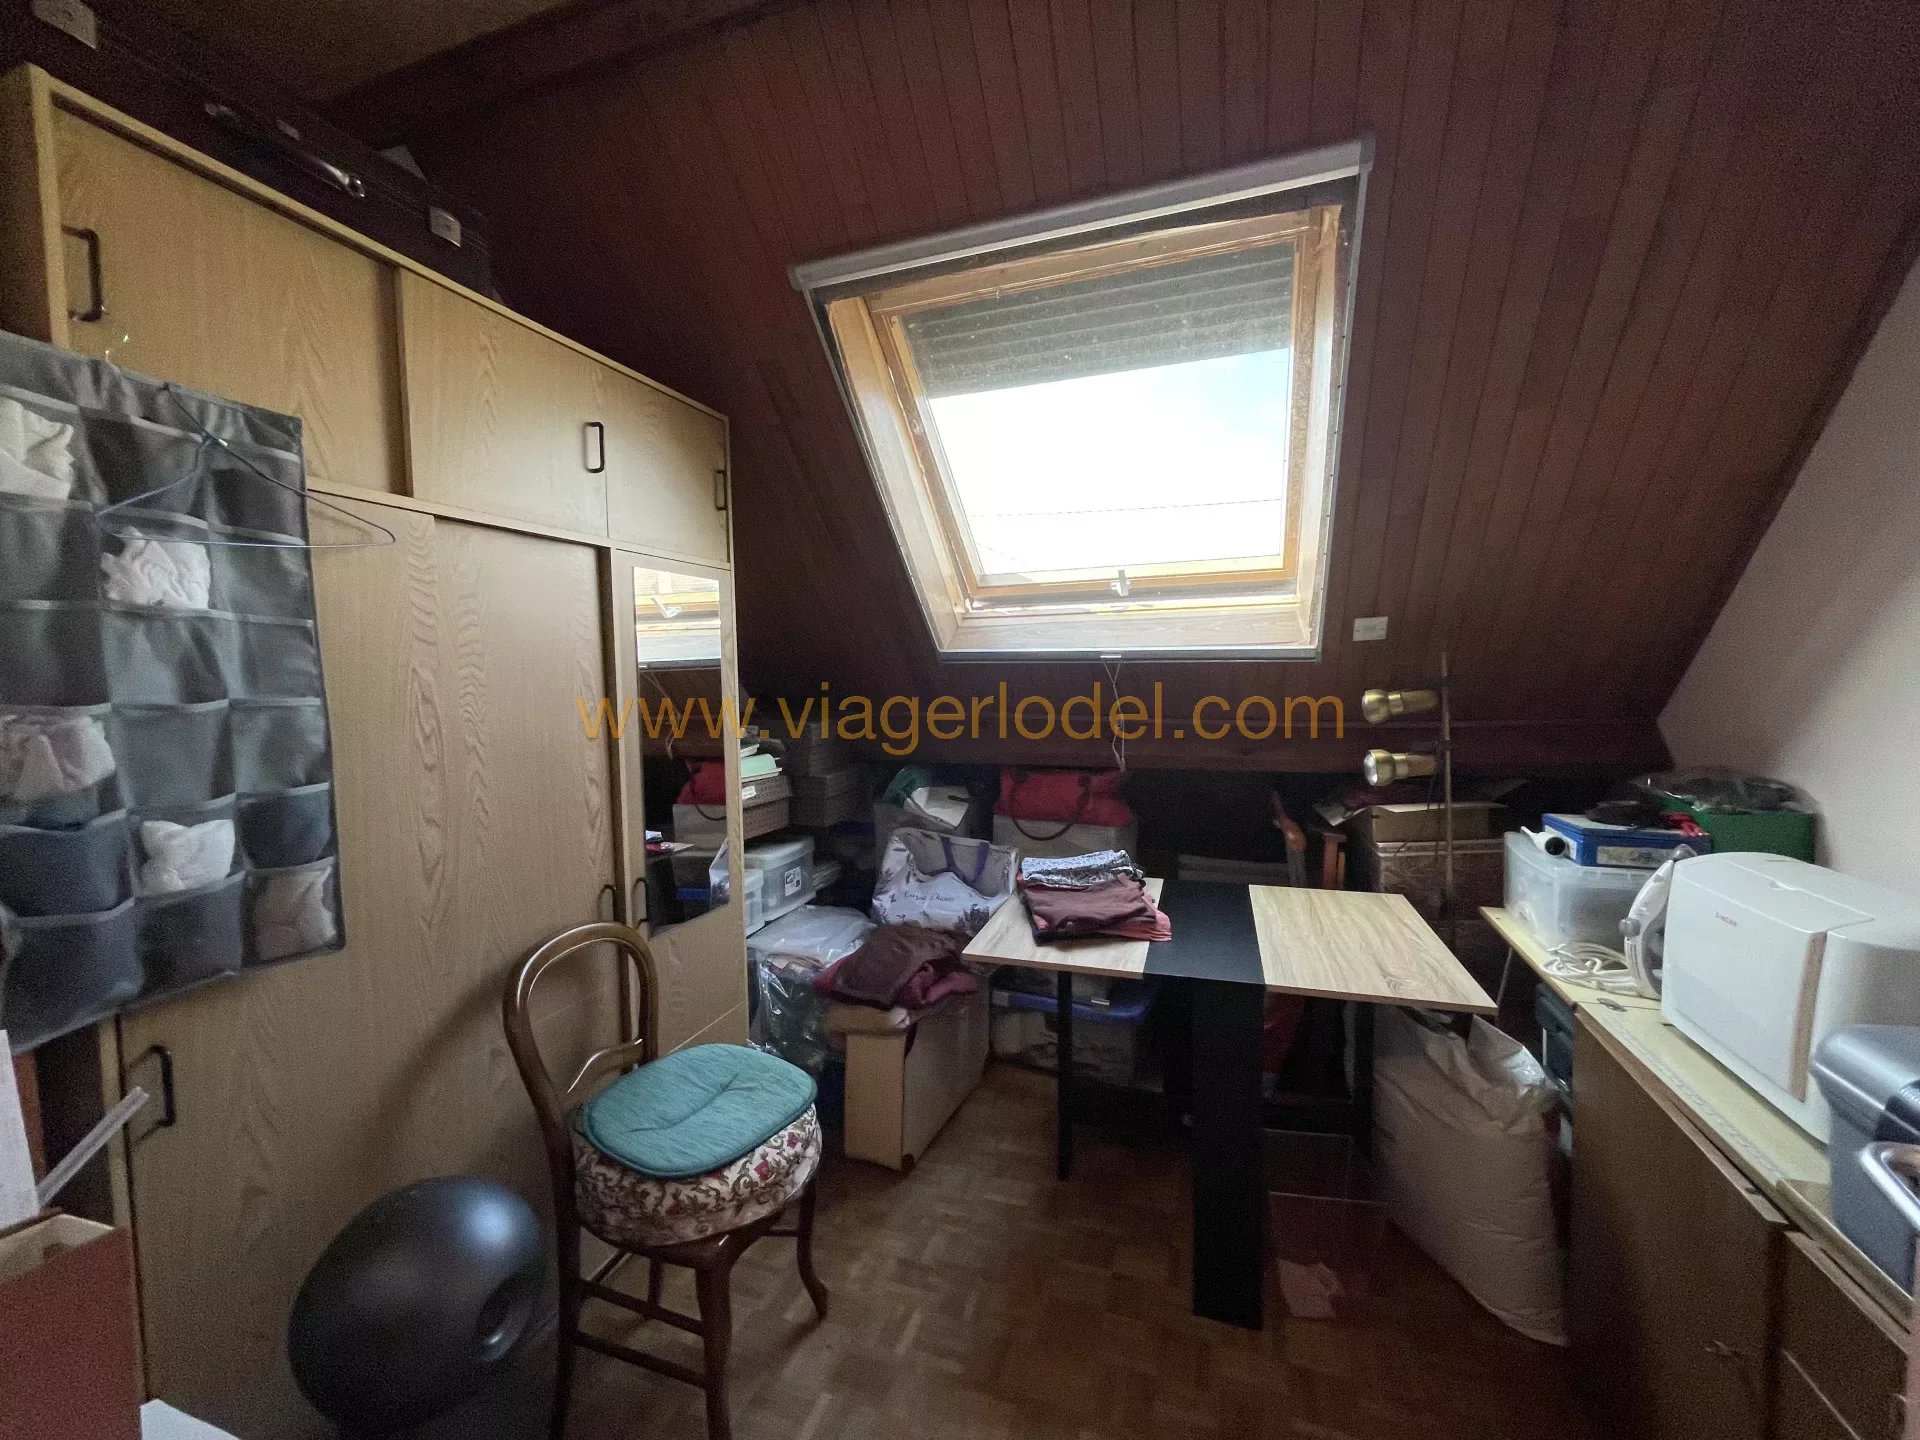 Ref. 9181 - BARE OWNERSHIP - VERRIERE-LE-BUISSON (91) -